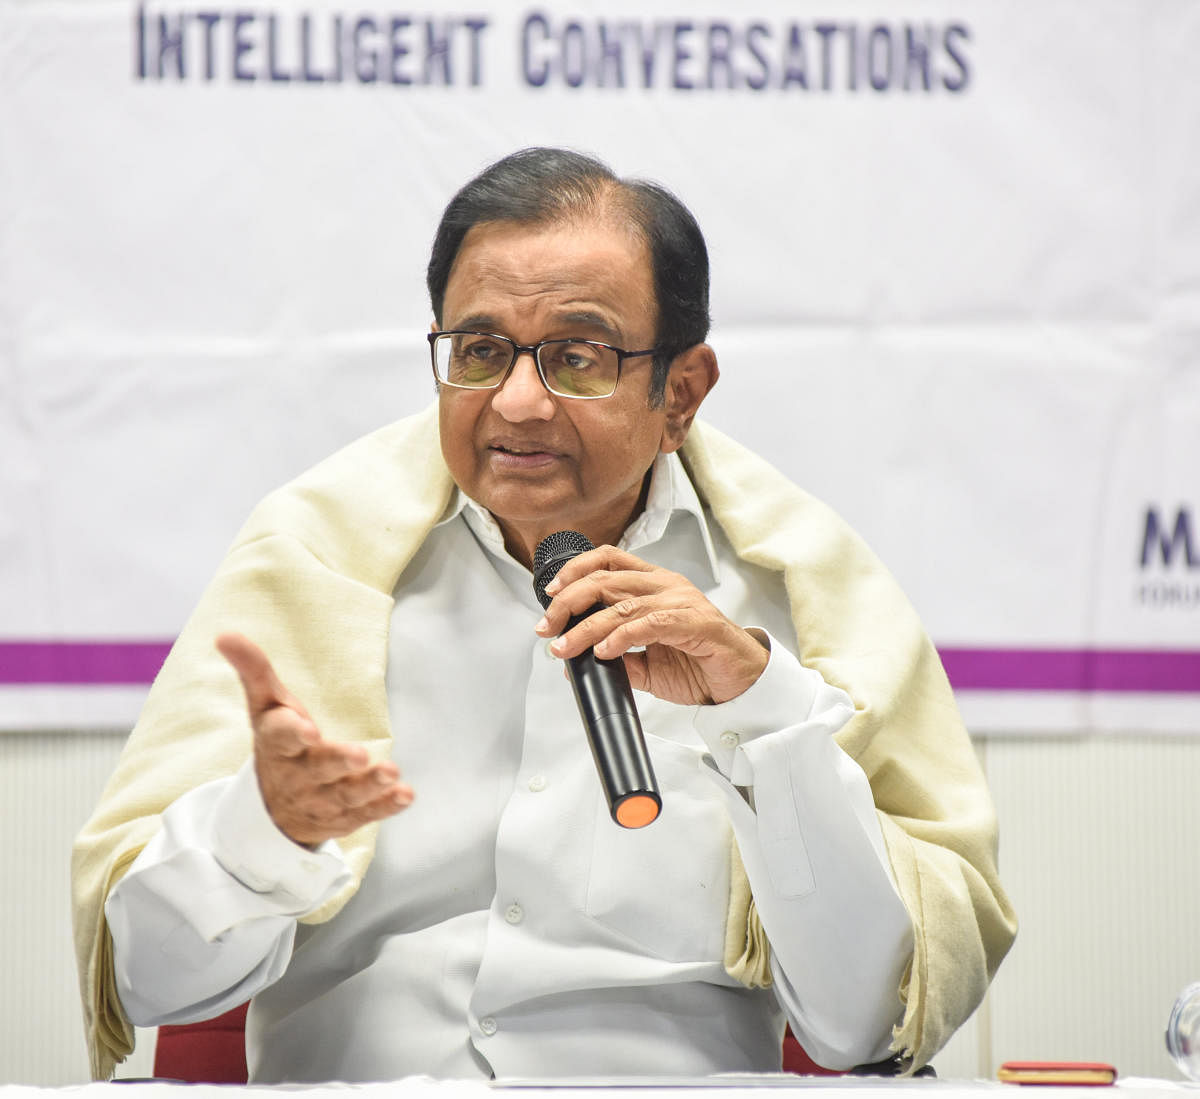 P Chidambaram, former Union Finance Minister, speaking at an intelligent conversations and his book Undaunted Saving the idea of India, programme at st Xavier auditorium in Bengaluru. (Photo by S K Dinesh)